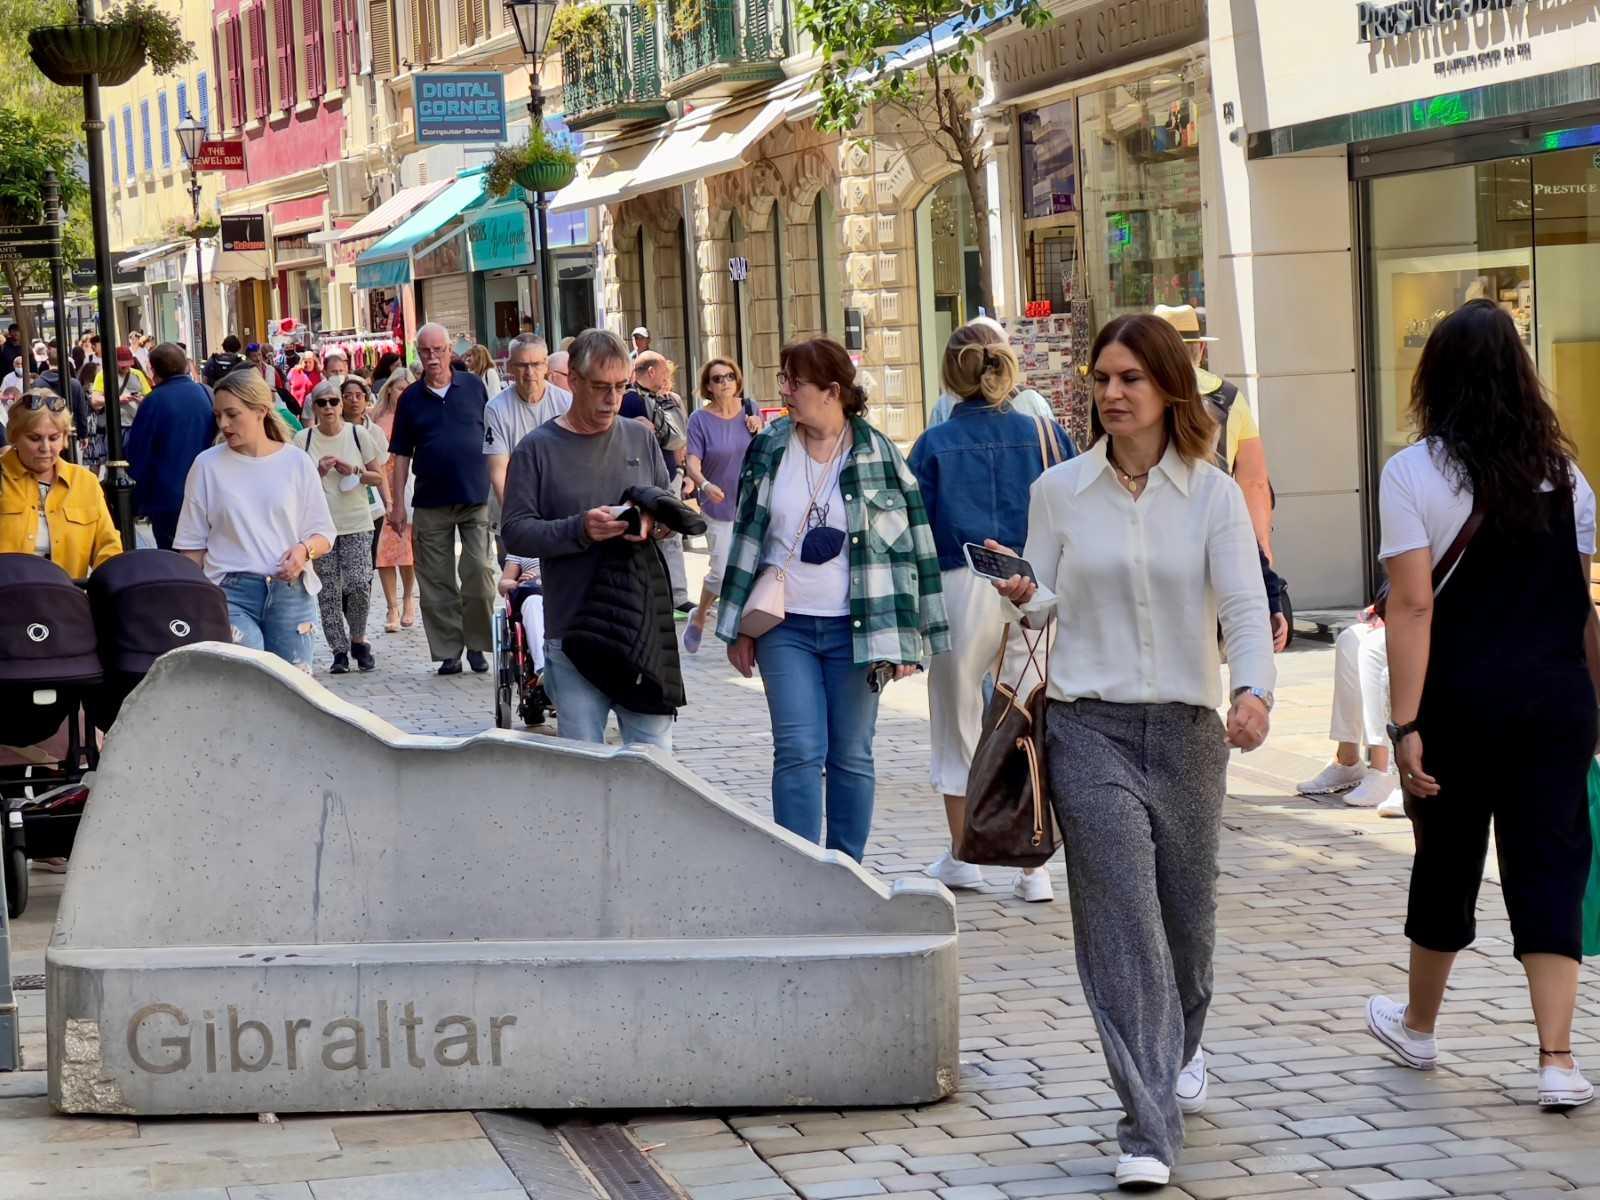 A stone marker in the shape of the Rock of Gibraltar is seen as tourists walk on main street in Gibraltar, on May 5. Photo: AFP 